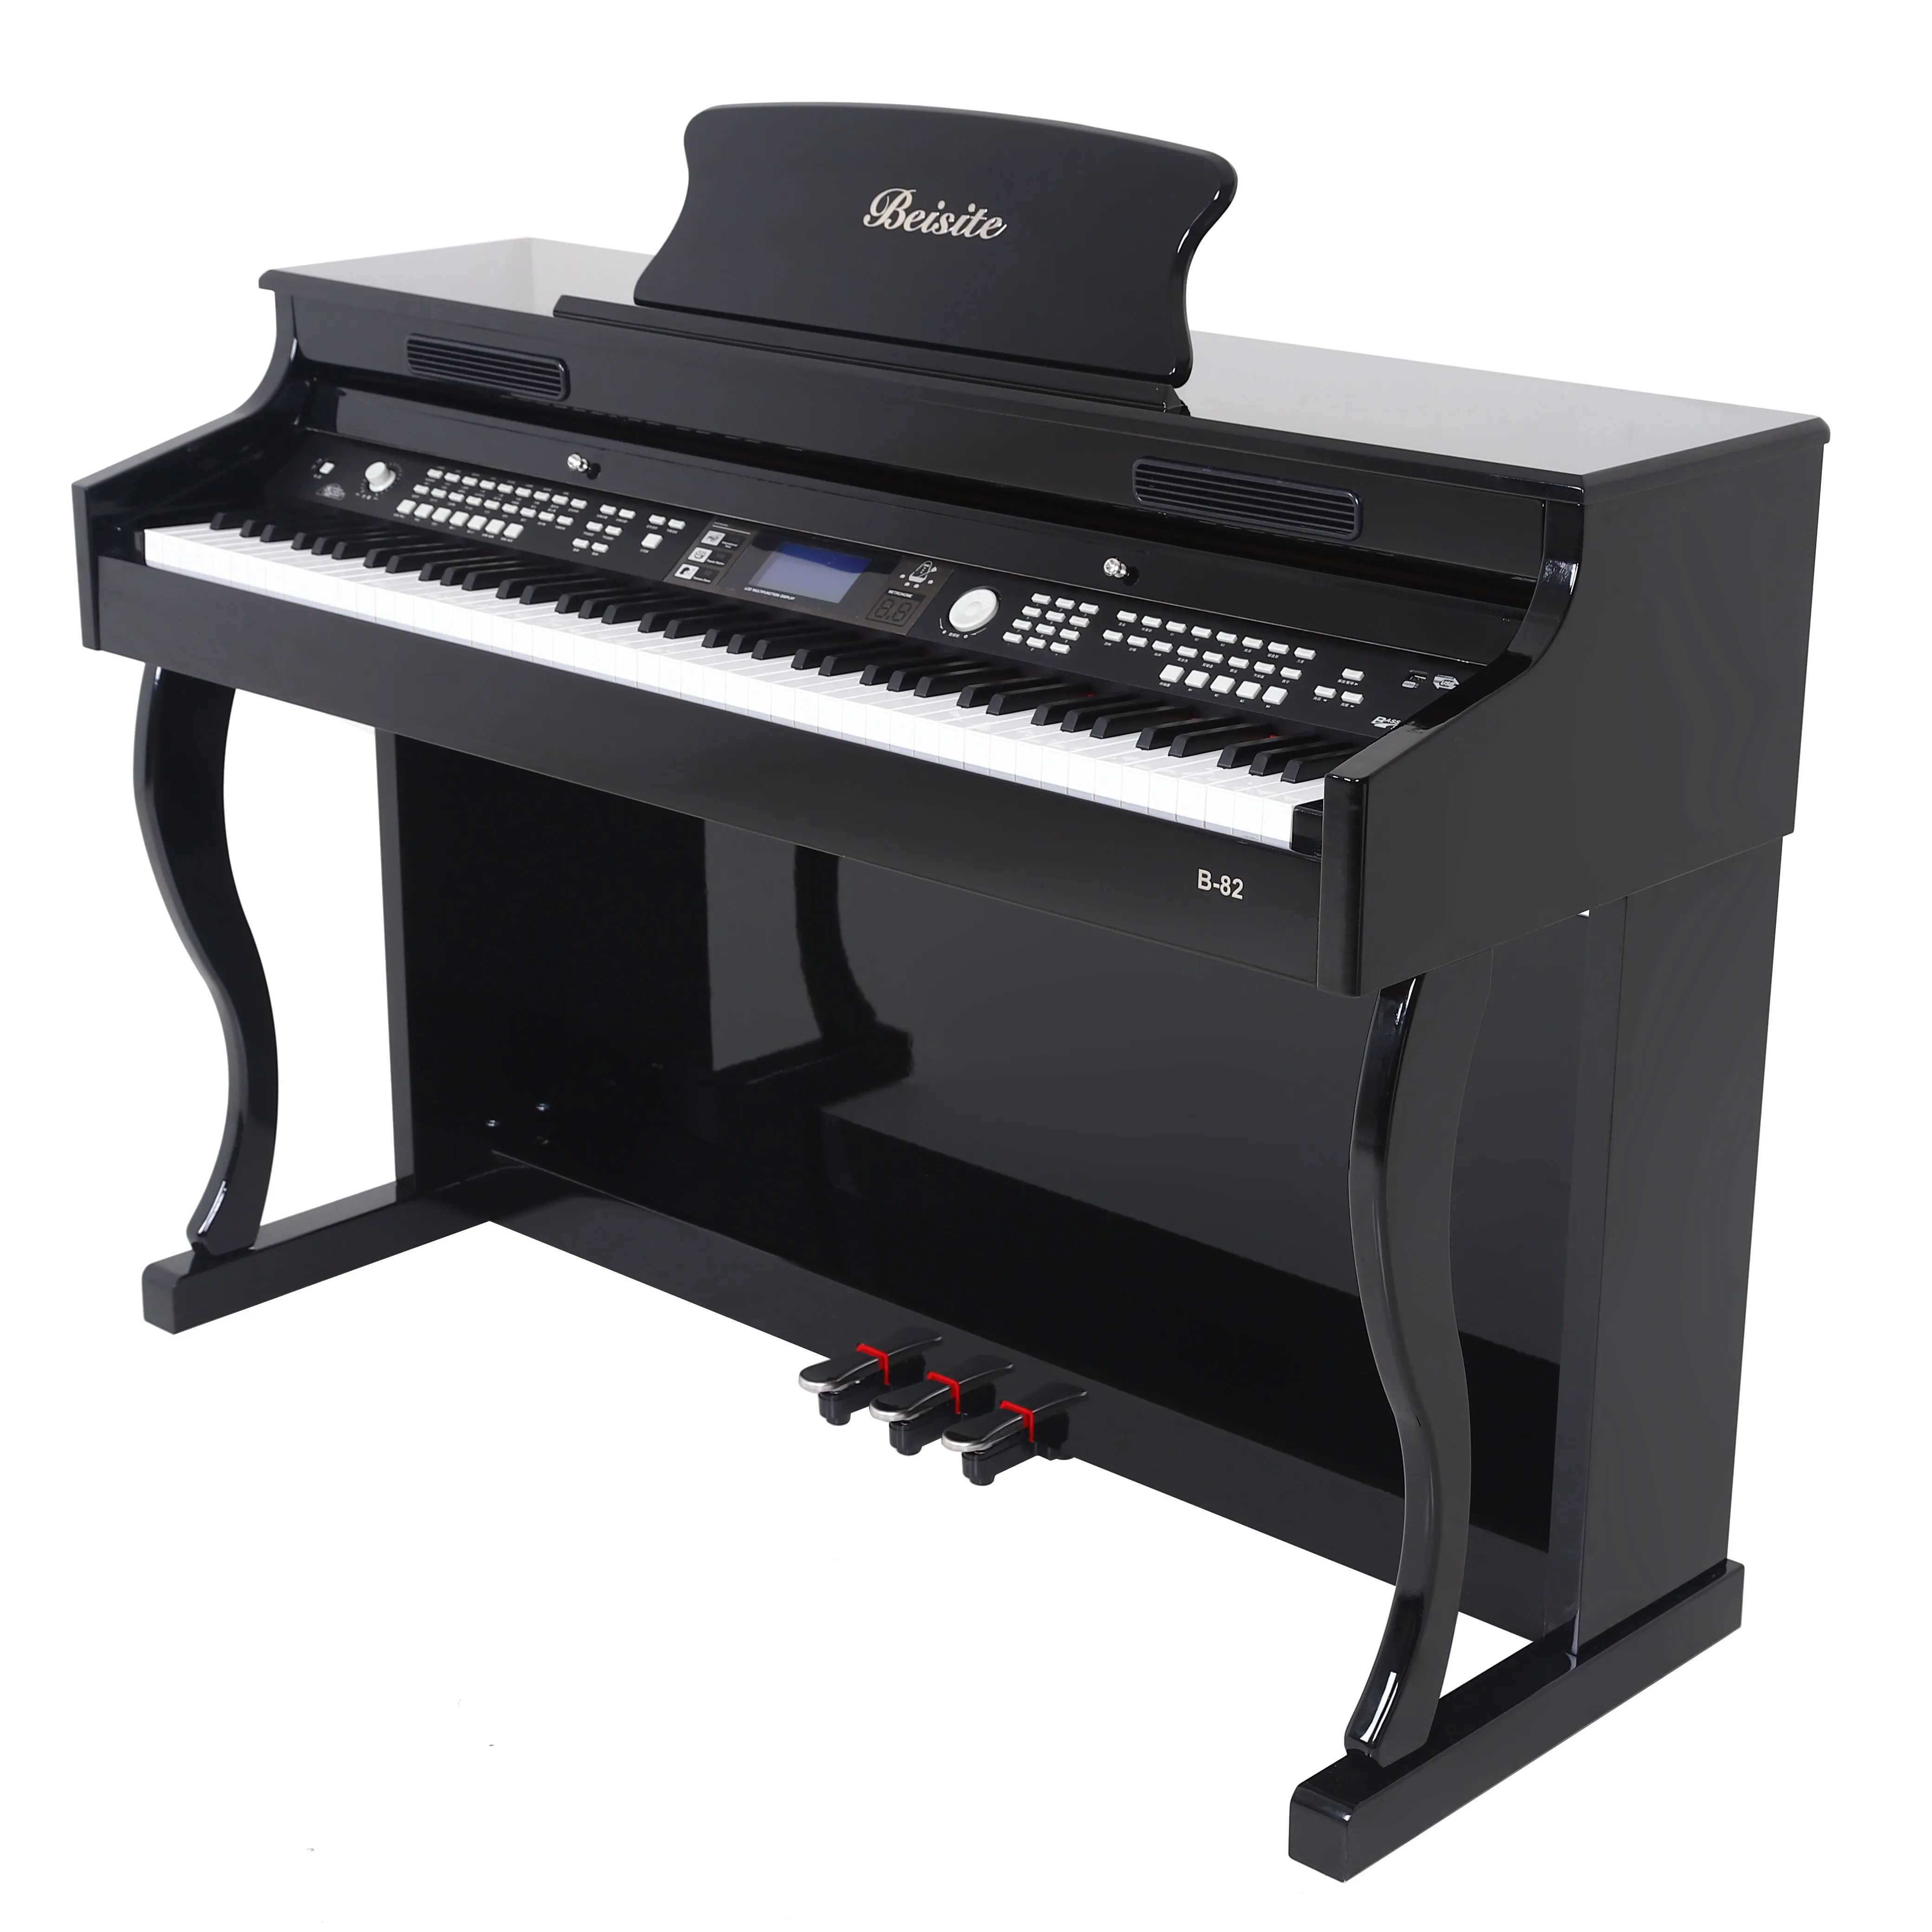 gezagvoerder cafetaria Oxide Waterproof 88 Keys Music Electronic Grand Upright Digital Keyboard Piano -  Buy Piano Electronic,Piano 88 Keys,Hammer Keyboard Product on Alibaba.com